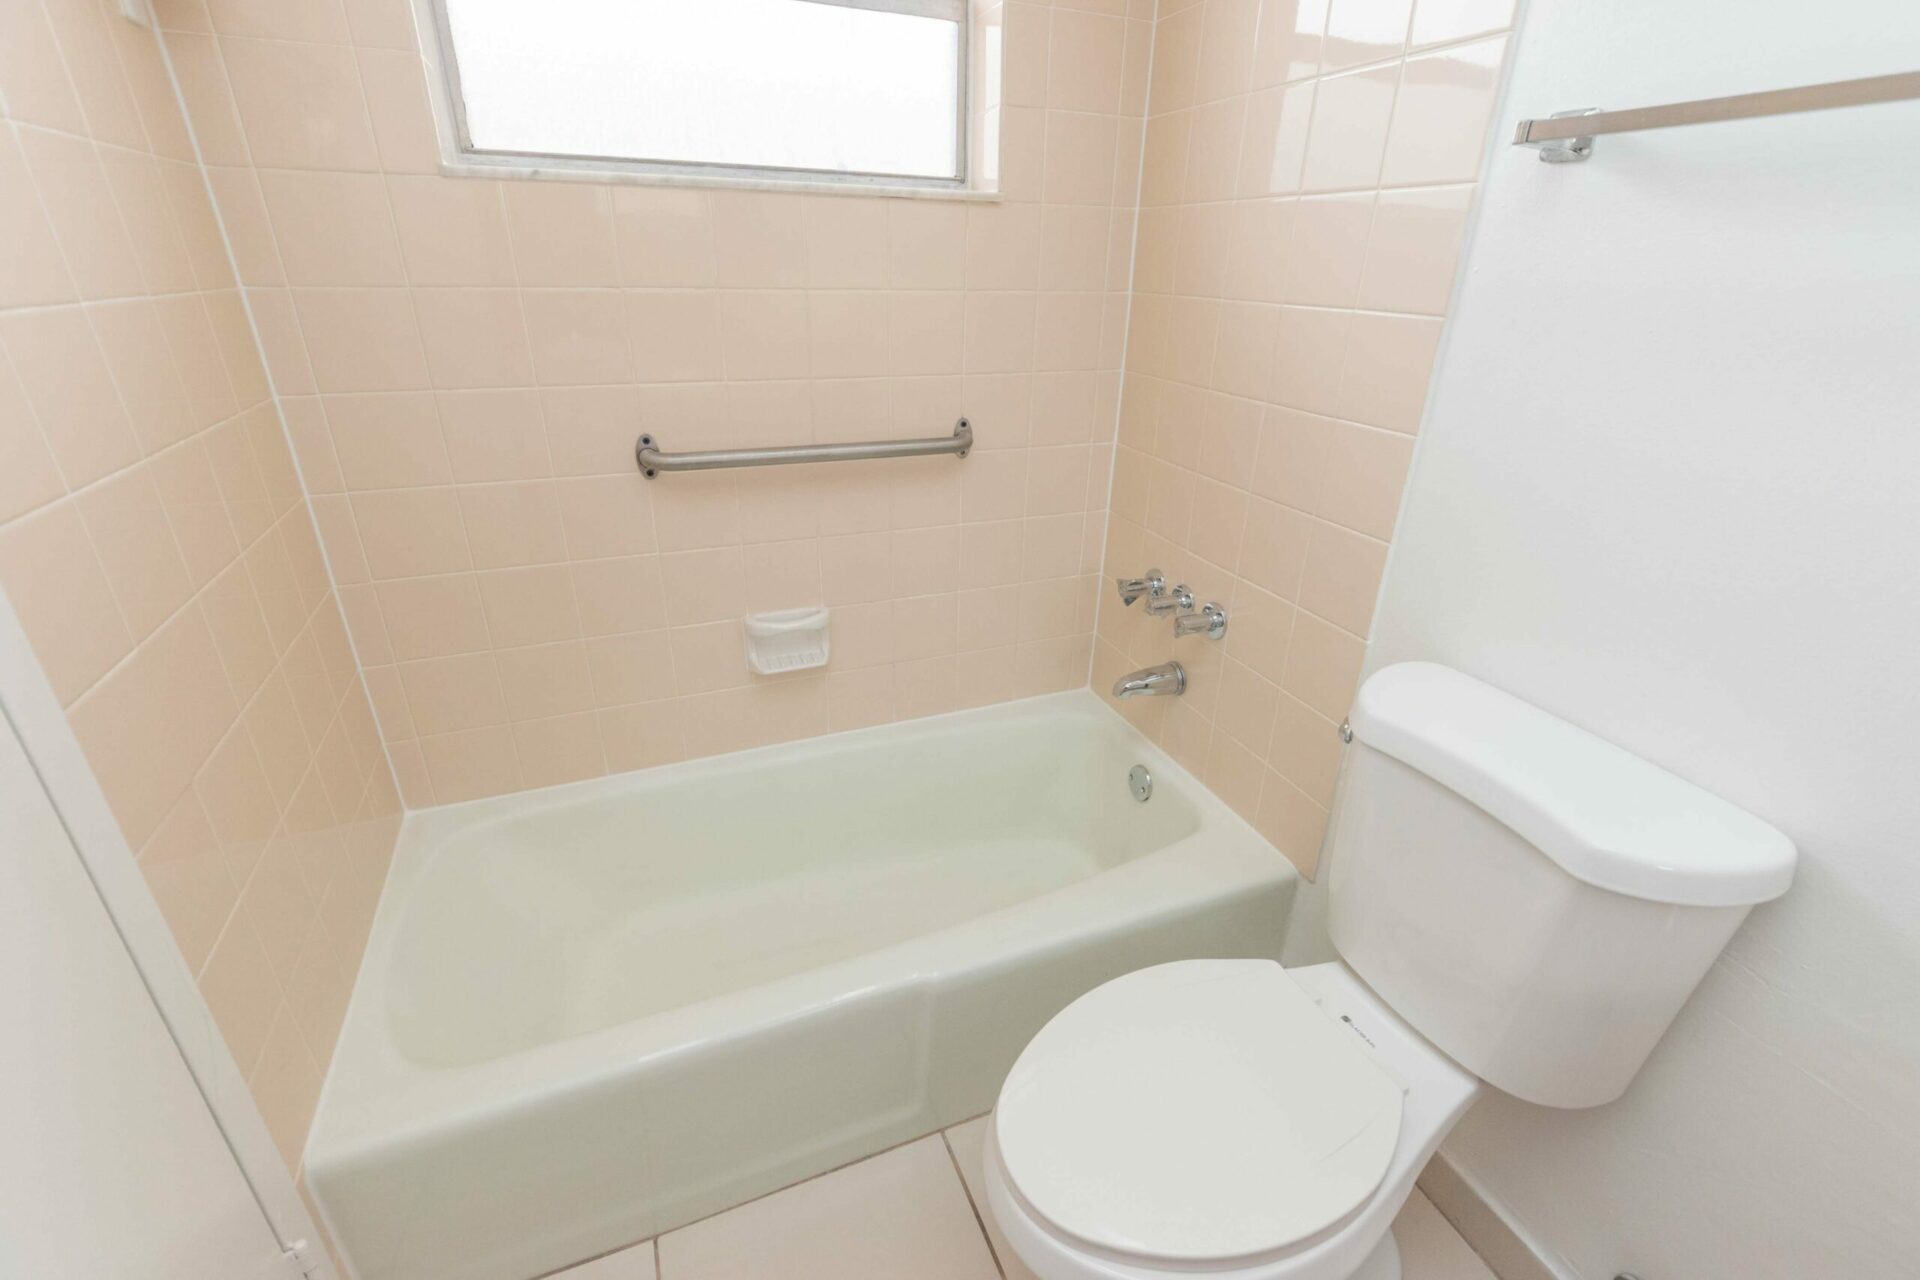 Bathtub with light pink tiles and a toilet in a bathroom of an apartment.